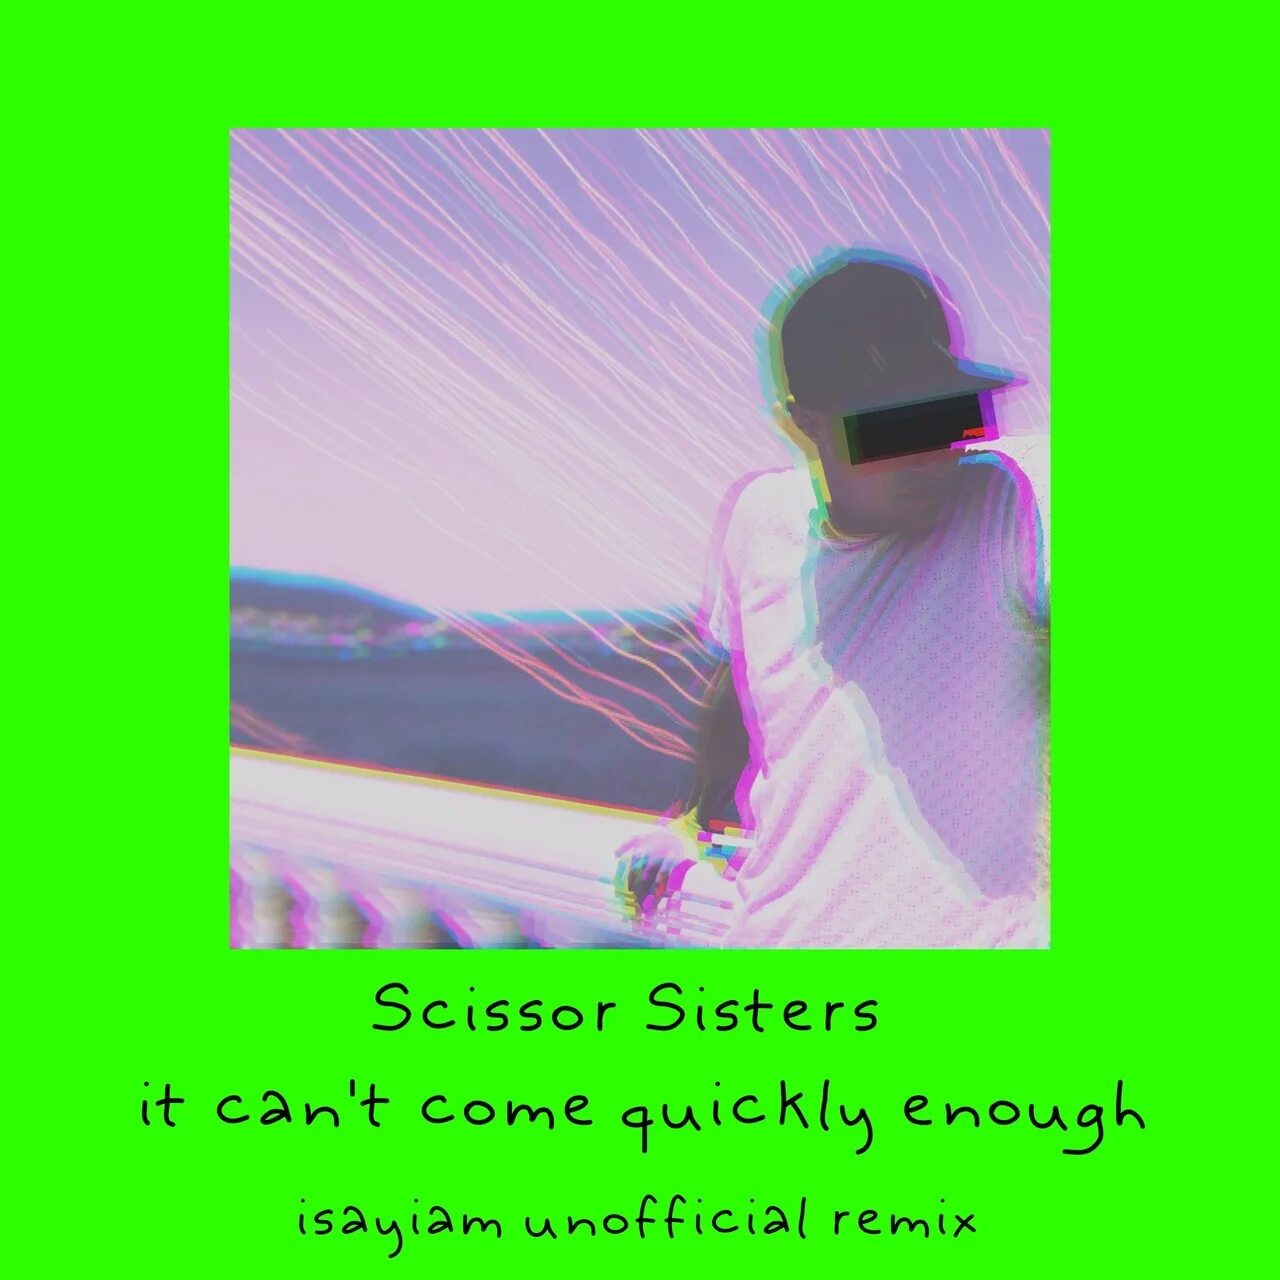 Scissor sisters i can t. It can't come quickly enough Scissor sisters. Sismic Music. It cant come quickly enough. It can't come quickly enough исполнитель. Scissor sisters it can't come quickly enough SM Boot Mix.